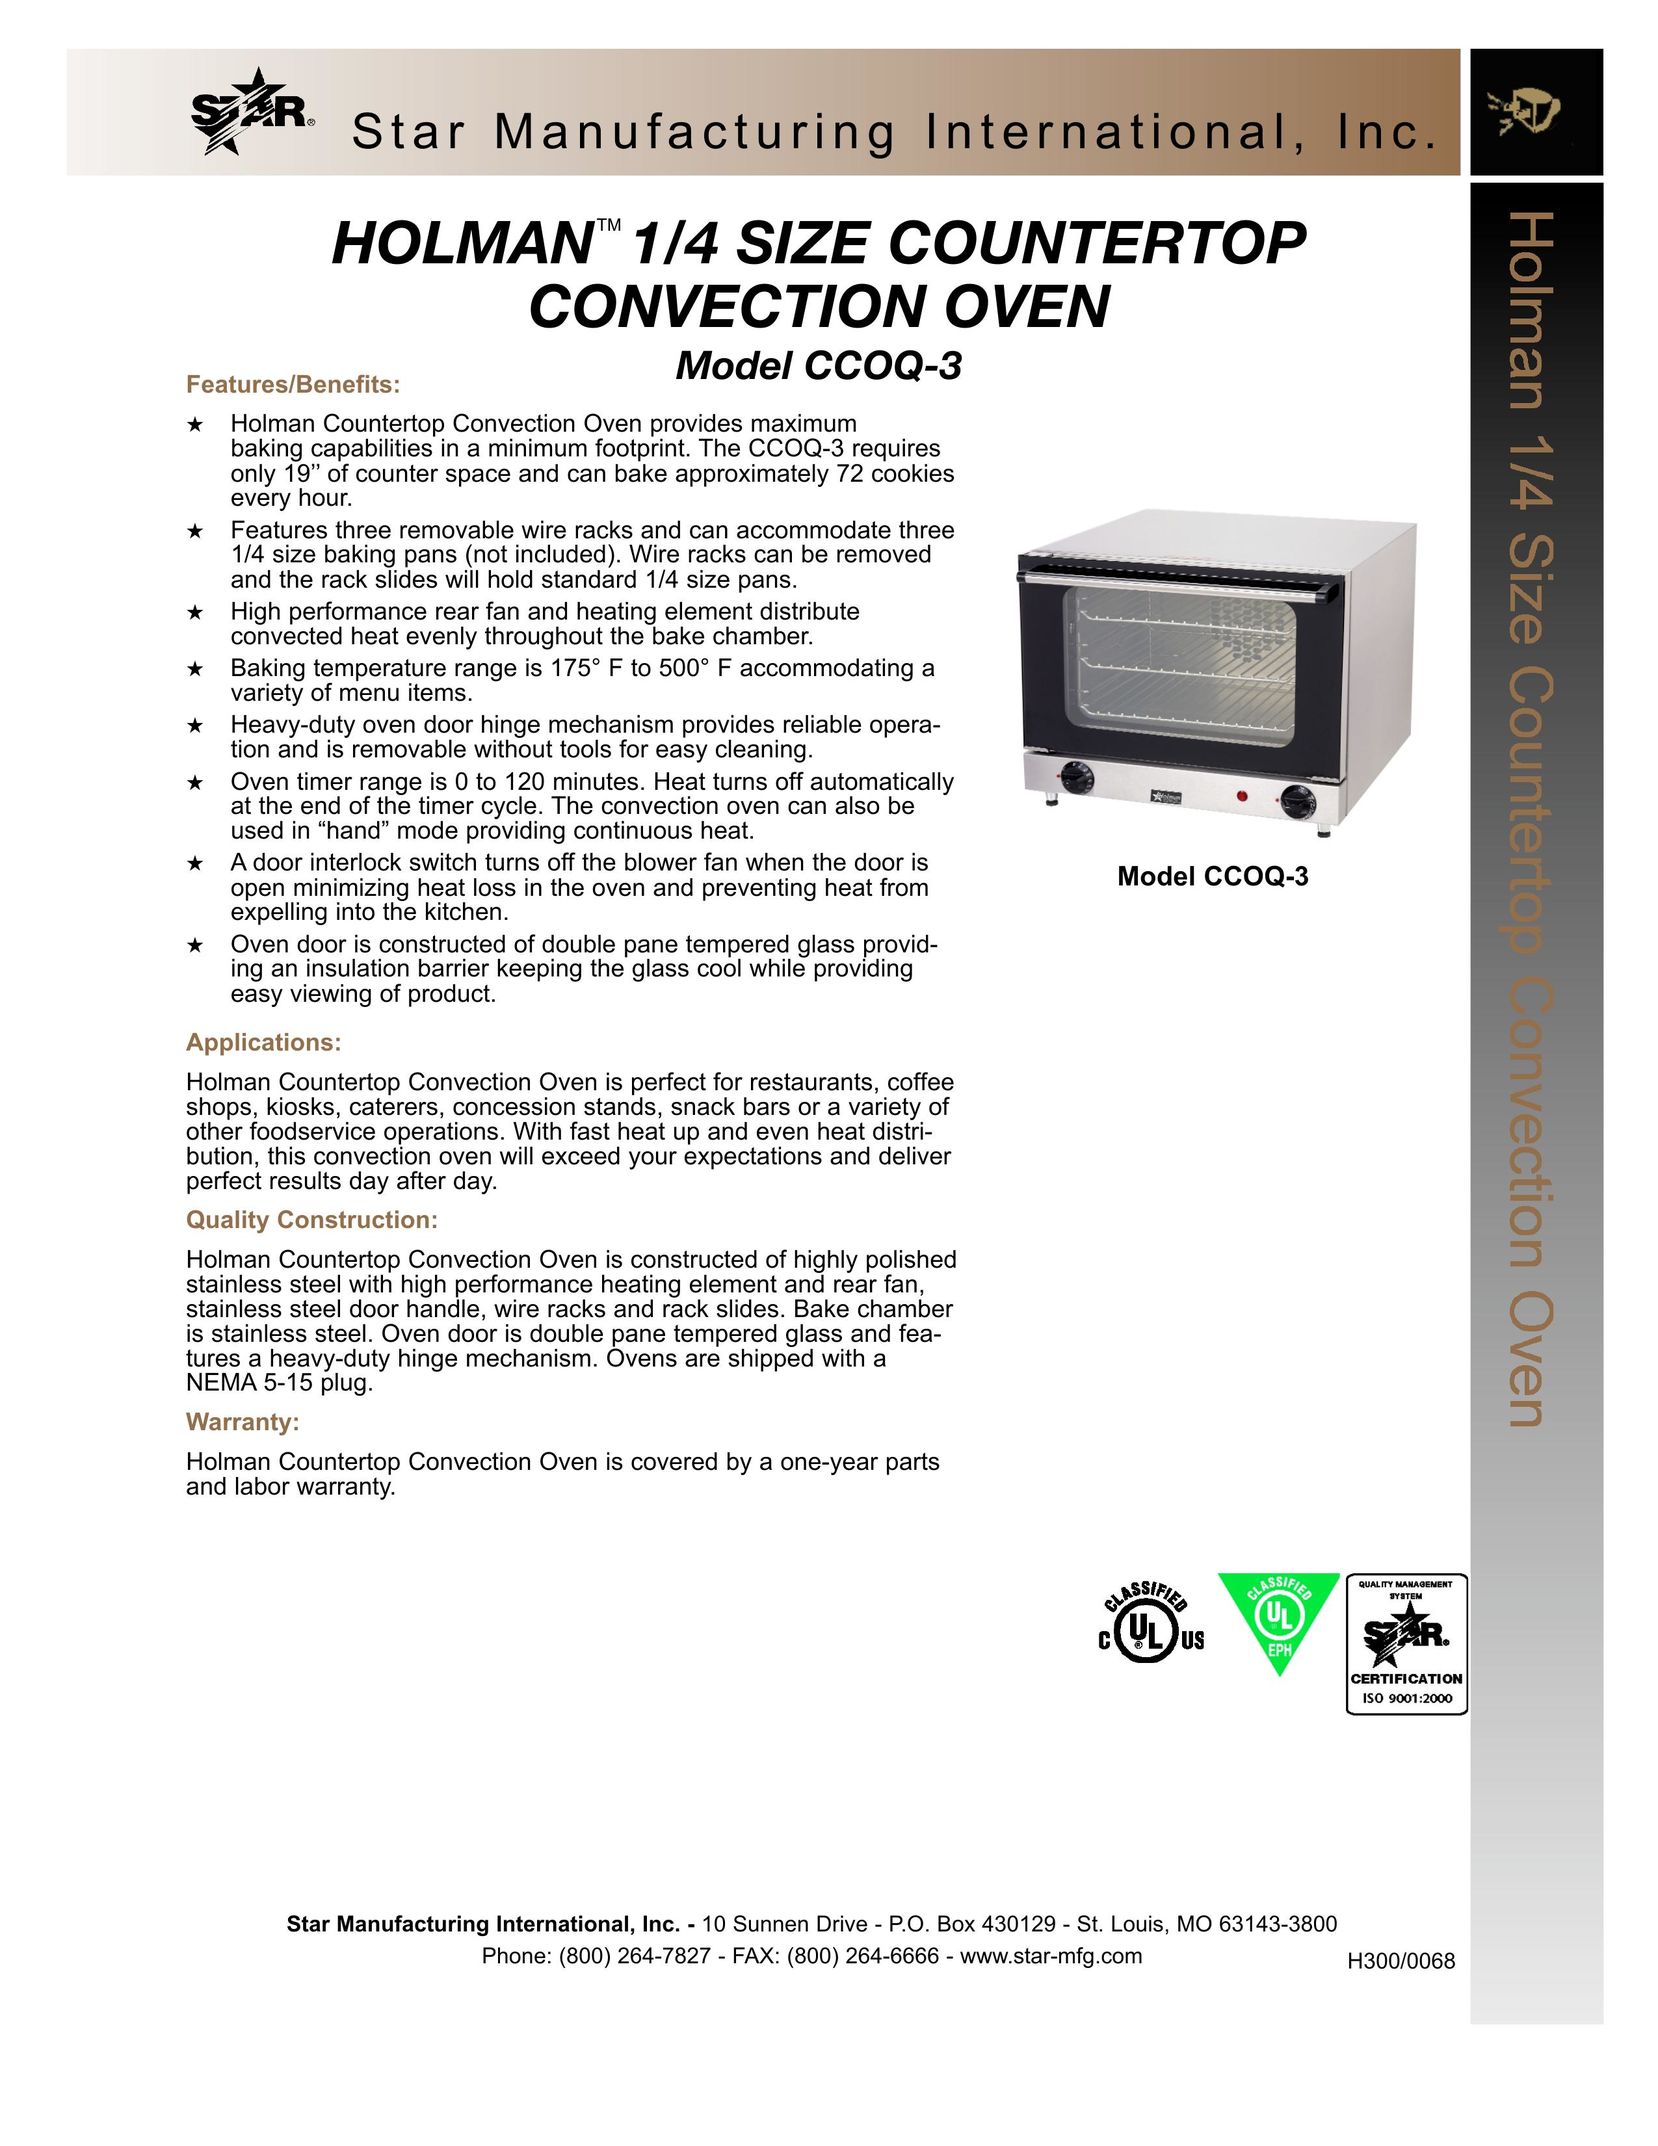 Star Manufacturing CCOQ-3 Convection Oven User Manual